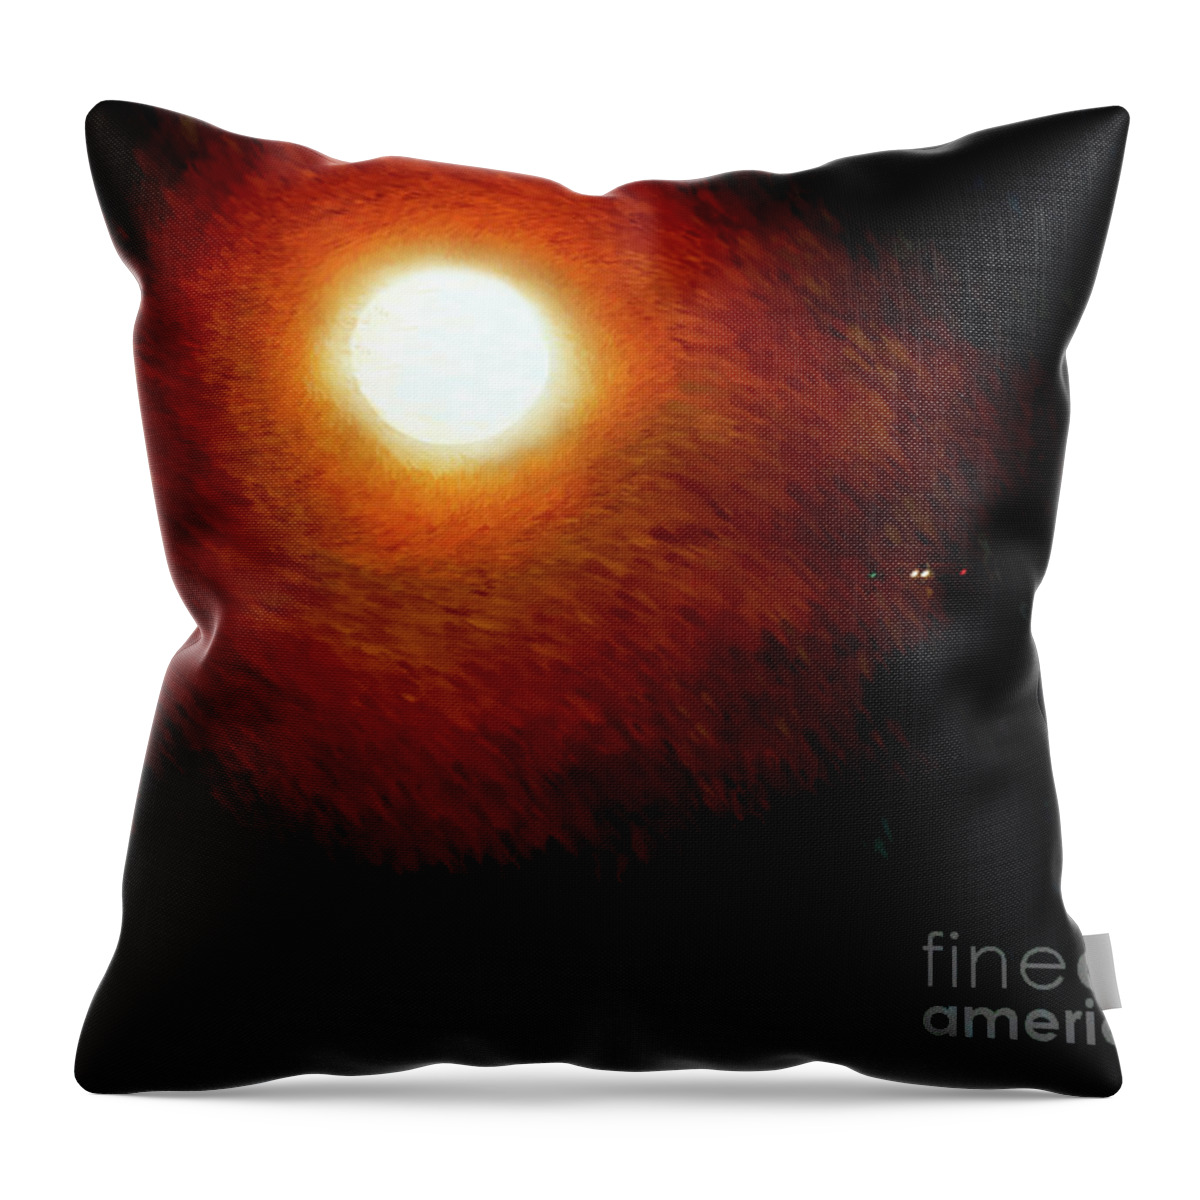  Throw Pillow featuring the photograph Moon And Ship by Blake Richards